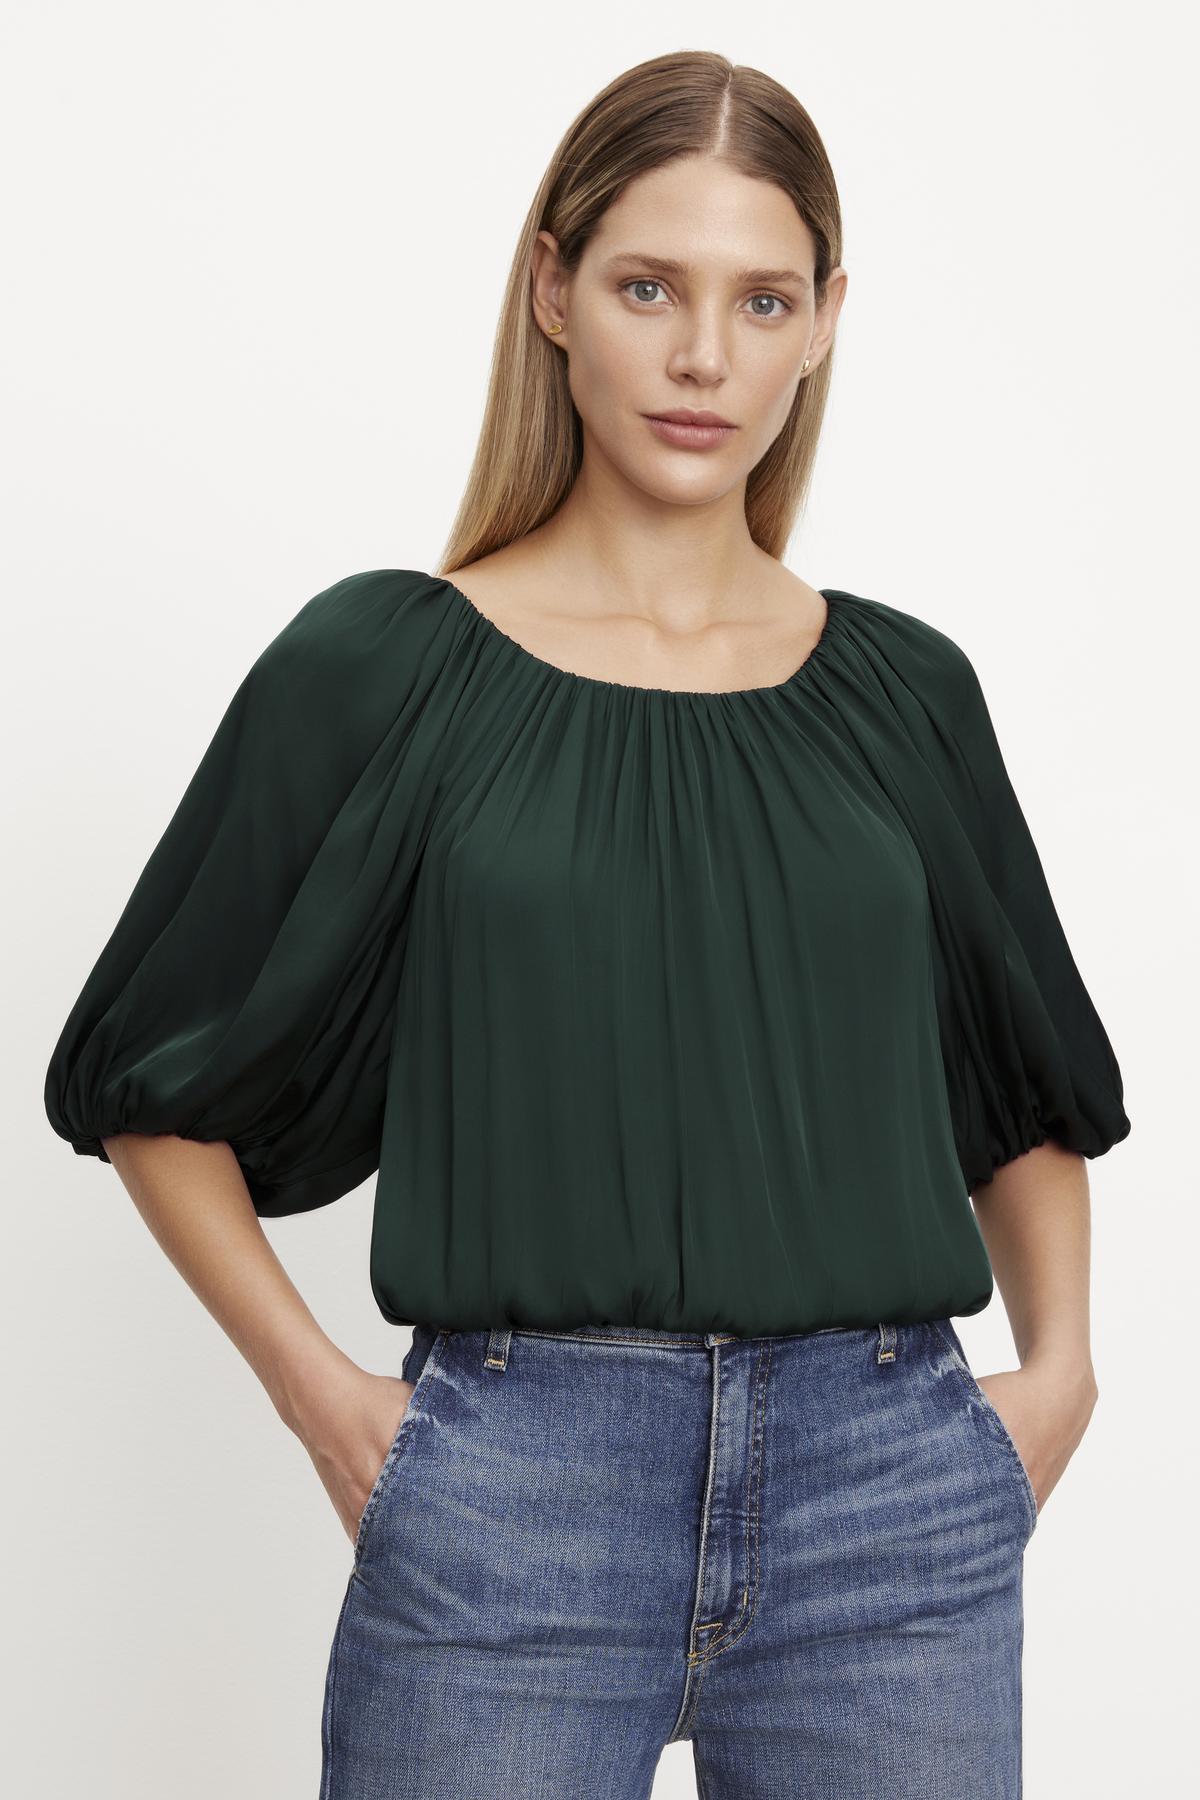 The model is wearing a green cropped TAMI SATIN PUFF SLEEVE TOP by Velvet by Graham & Spencer.-35654471155905